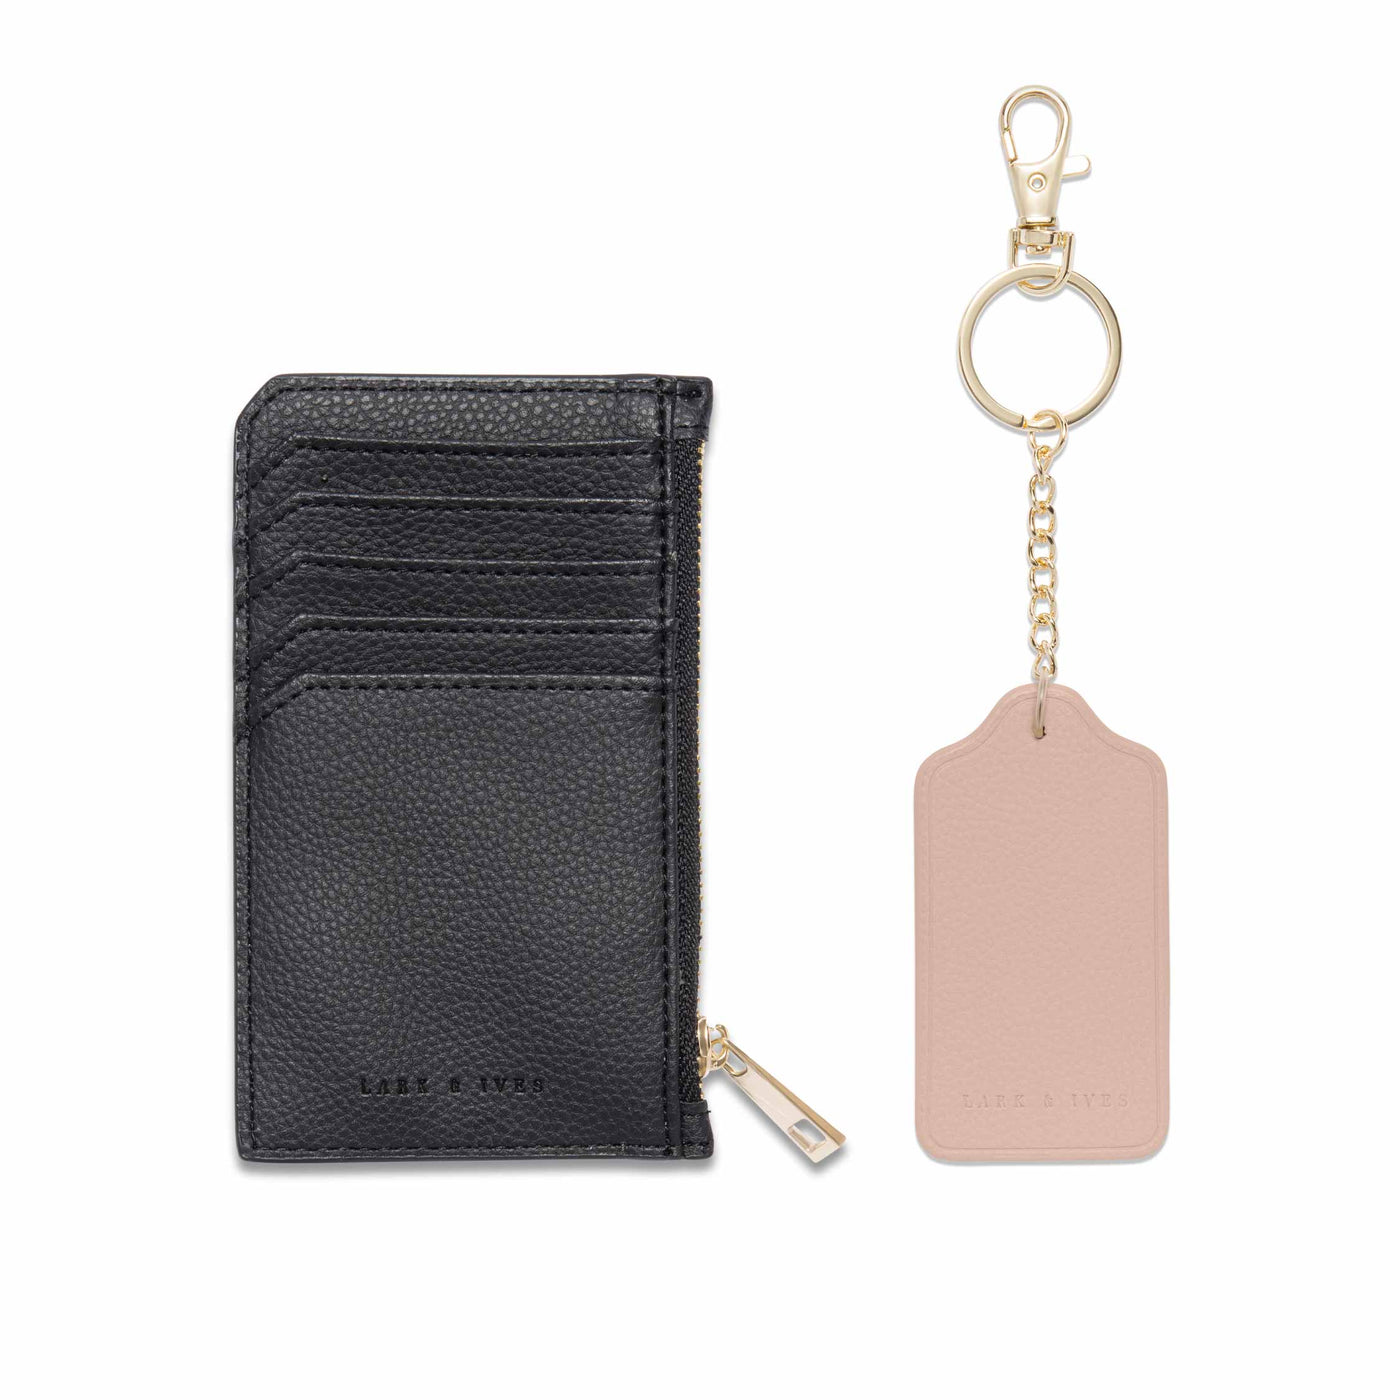 Lark and Ives / Vegan Leather Accessories / Small Accessories / Wallet / Mini Wallet / Card Case / Card Holder / Zippered Wallet / Zipper closure / Keychain / Key ring / Tag Keychain / Black Holder and Nude Pink Keychain